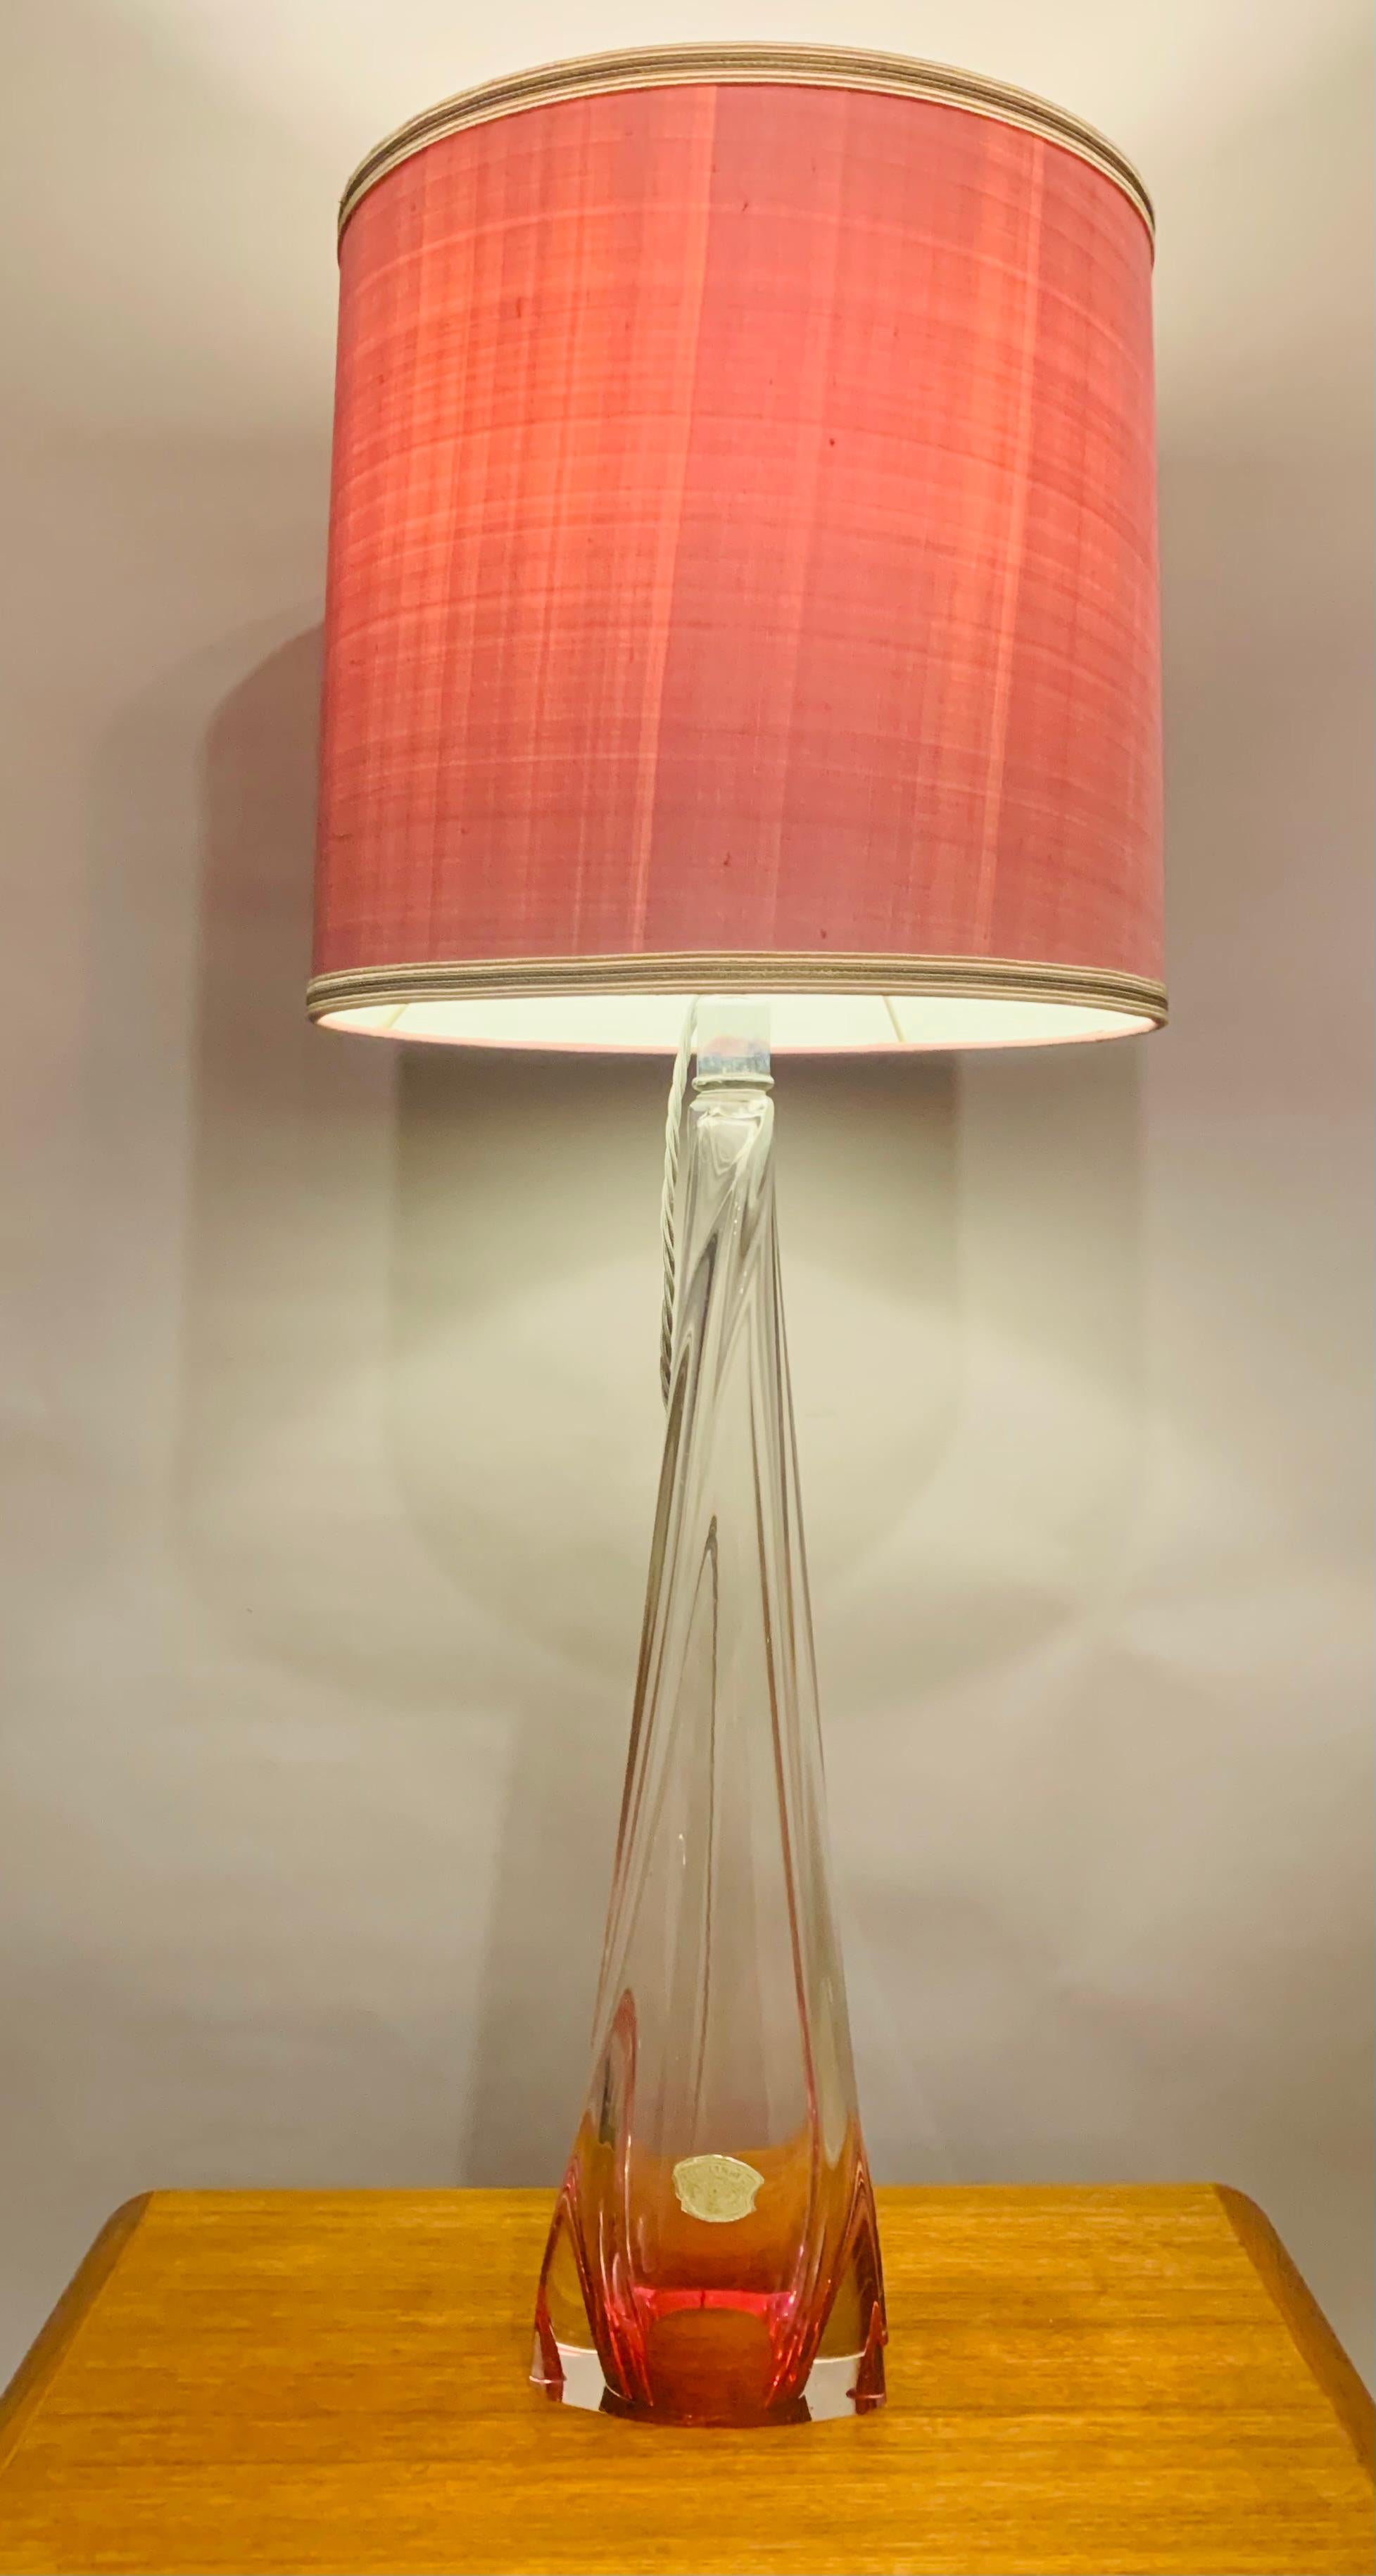 Tall Val Saint Lambert, pink and clear, crystal glass table lamp base with a turned tapering form at the top of the lamp. The lamp was made in the 1950s in Belgium. The lamp is fitted with a brass mounted socket fitting with the on/off switch fitted